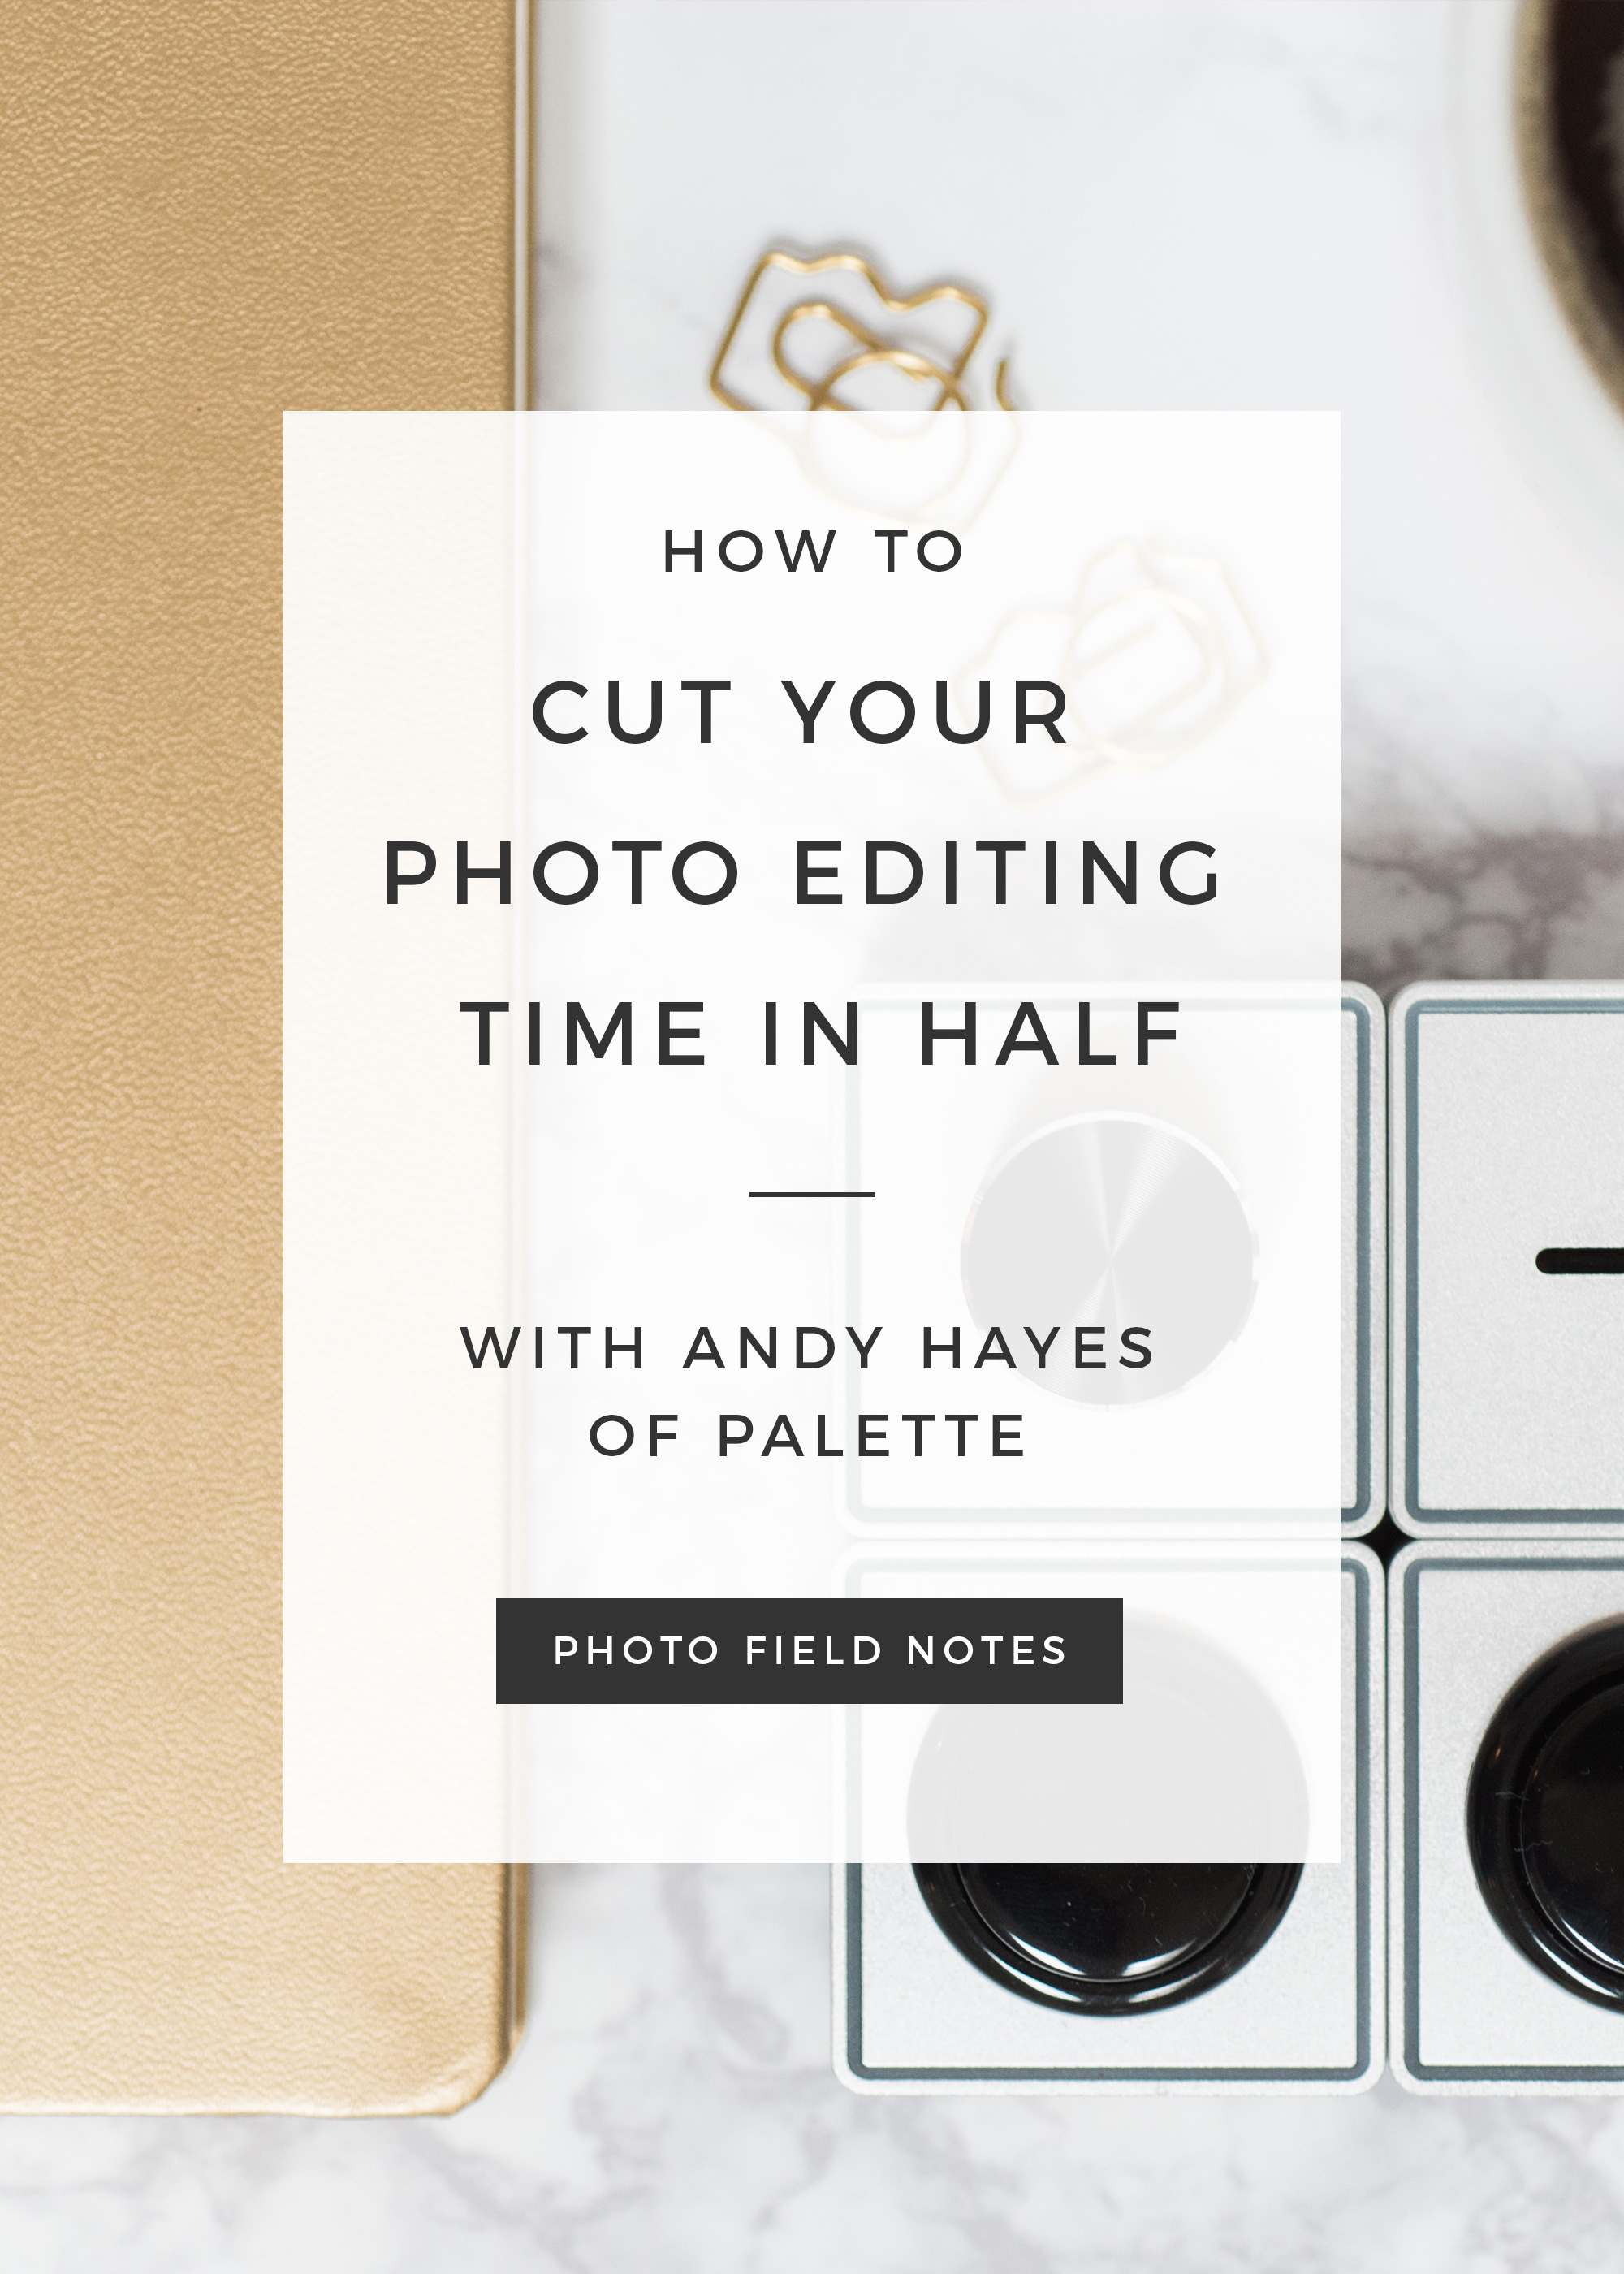 How to cut your photo editing time in half (speed up your photo editing)